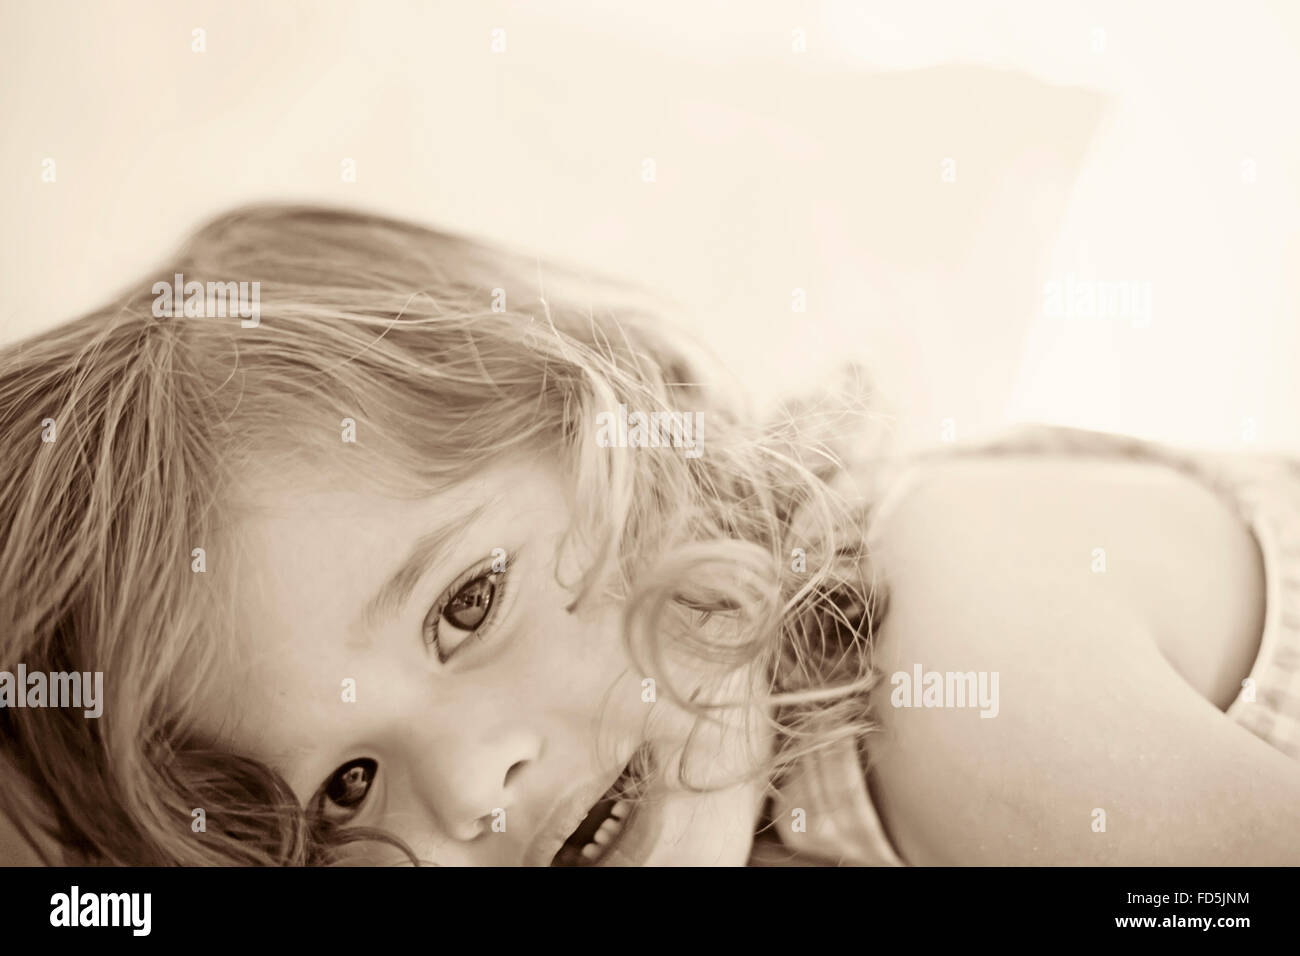 Beautiful toddler girl laying down looking at the camera with an interesting crop. Stock Photo